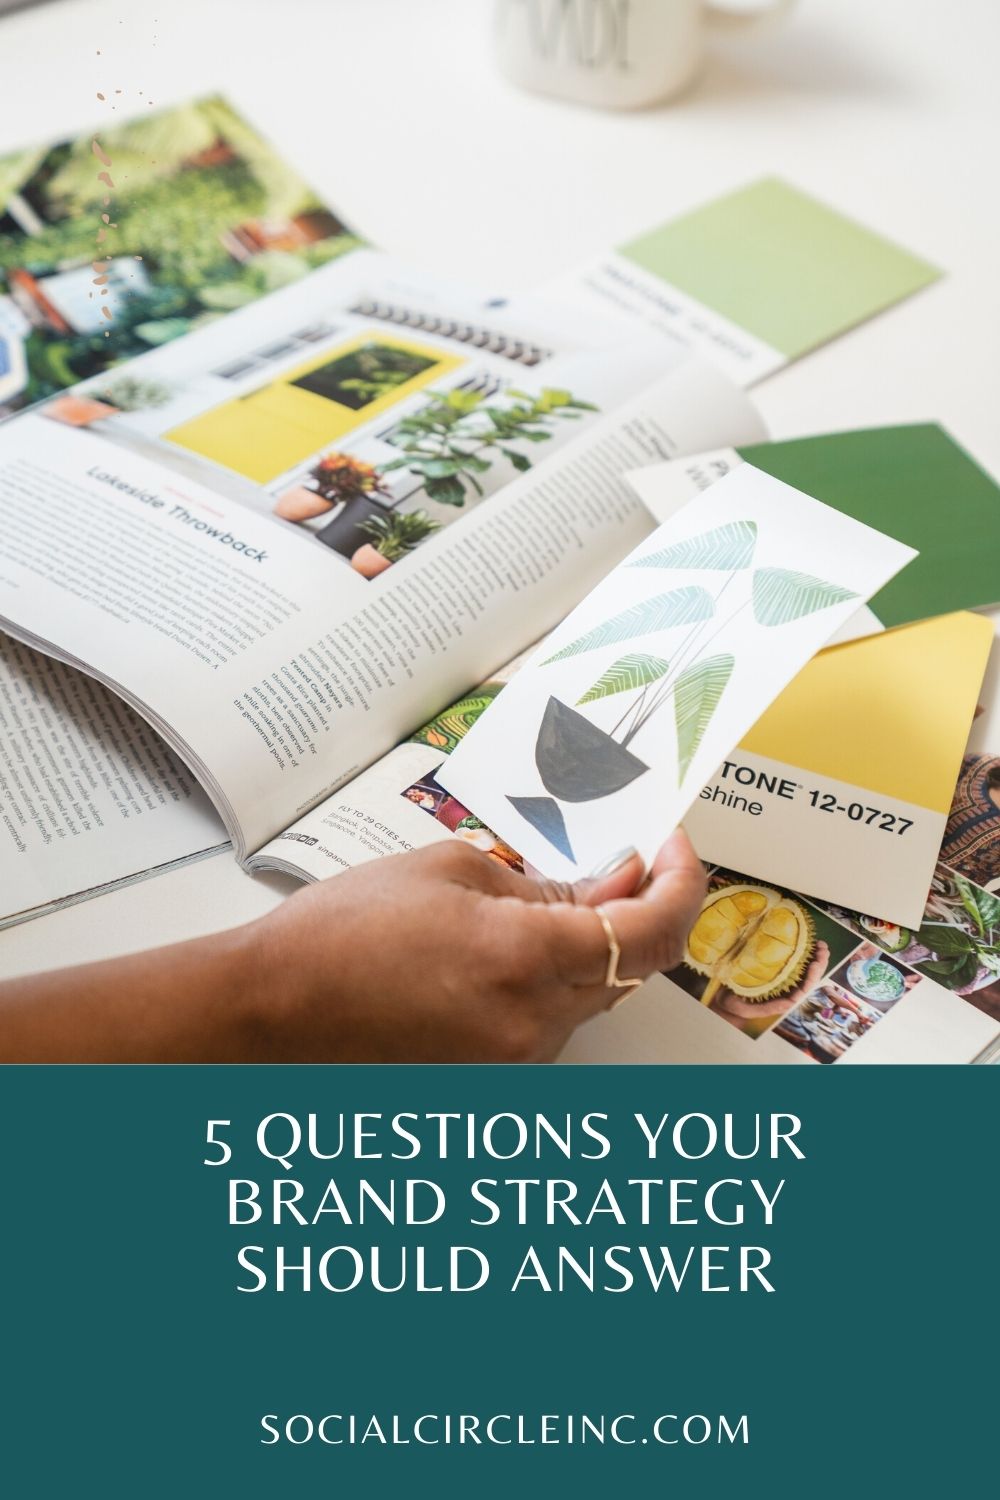 5 Questions Your Brand Strategy Should Answer